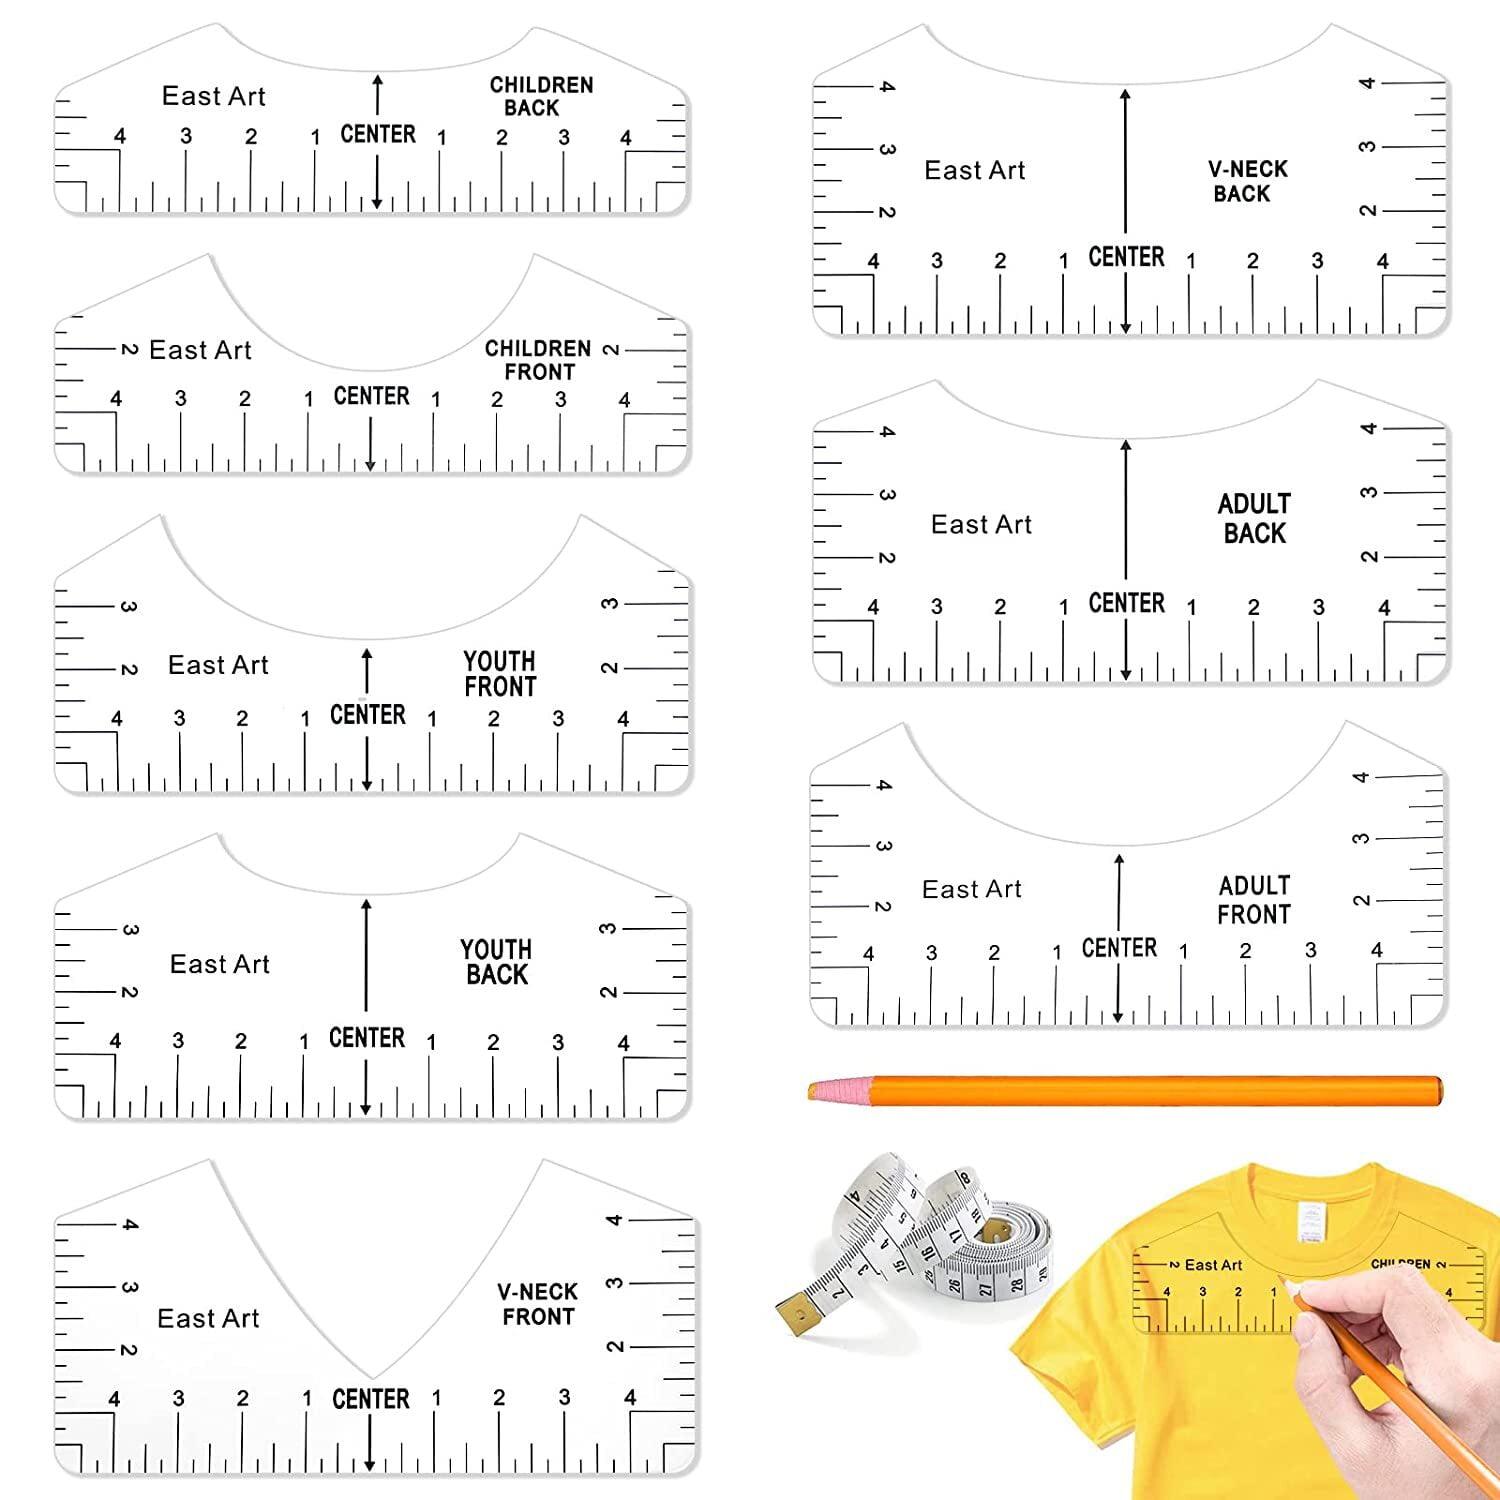 Tshirt Ruler Guide for Alignment, TShirt Rulers to Center Designs